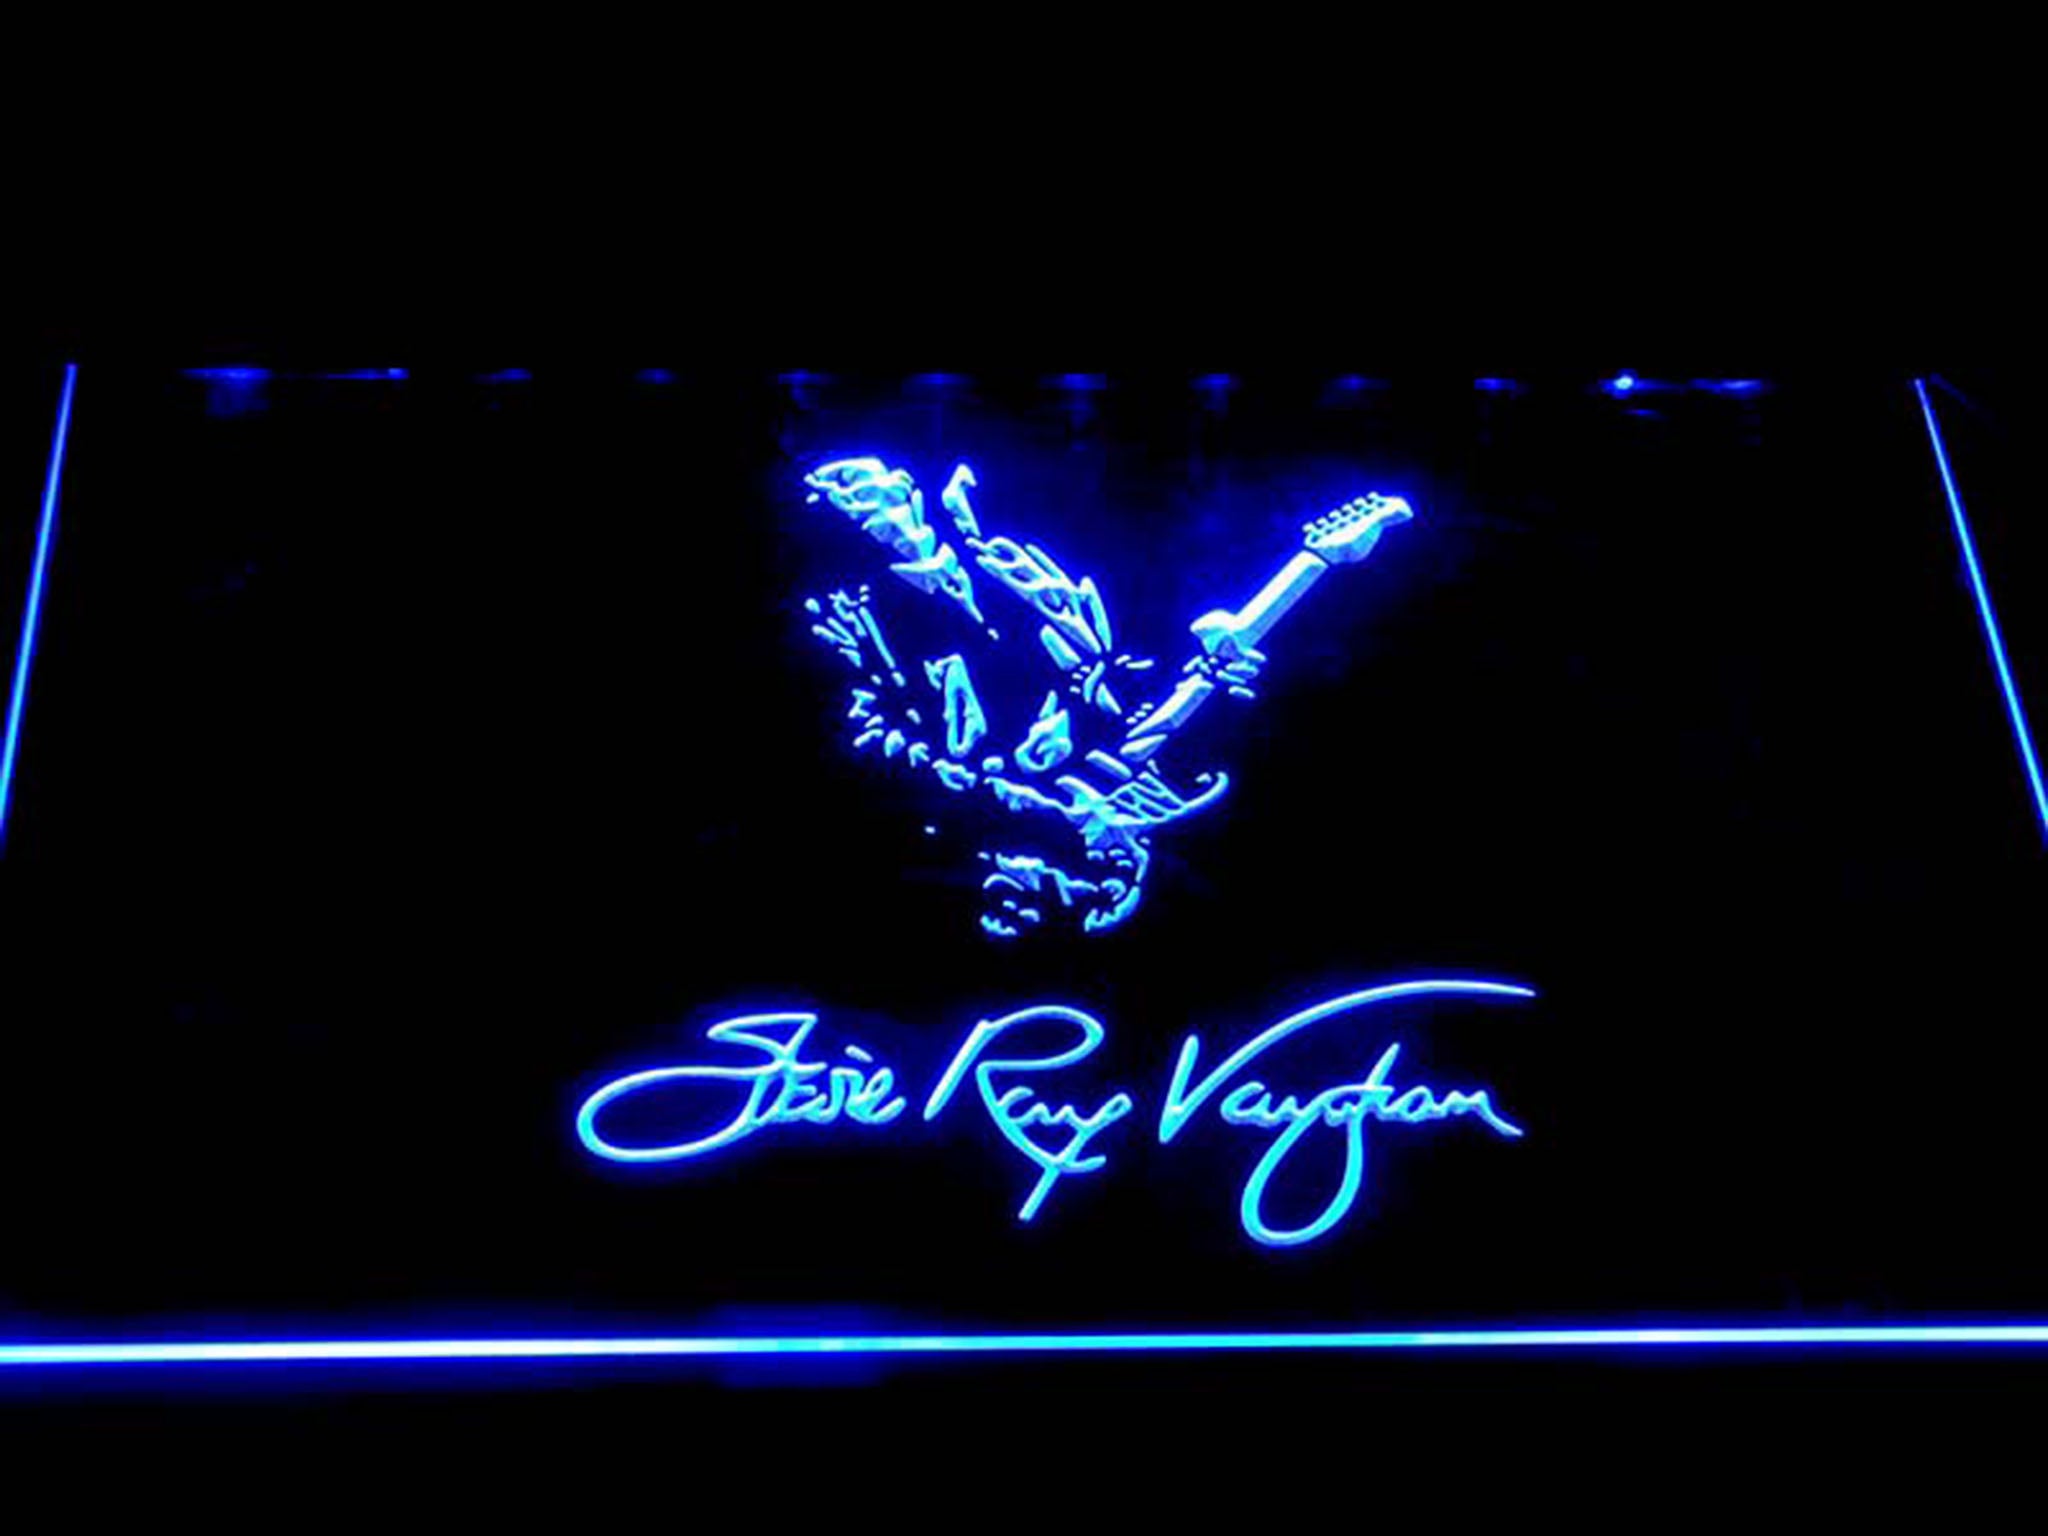 Stevie Ray Vaughan Americna Musician LED Neon Sign